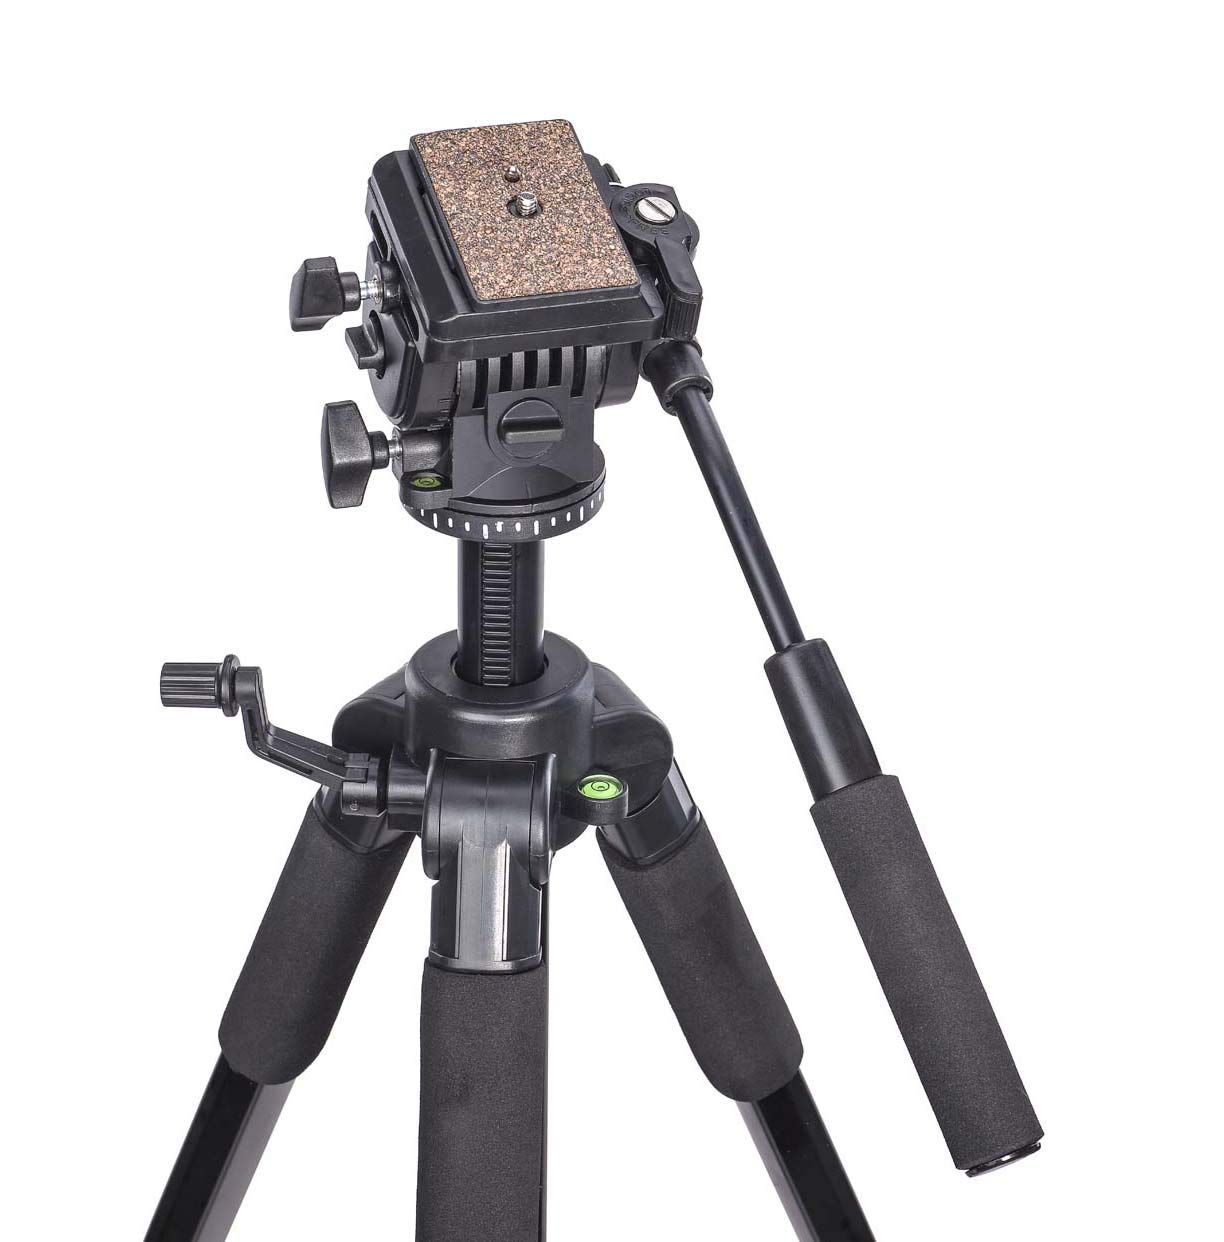 Simpex Tripod VCT 880 Plus with Bag for DSLR Camera